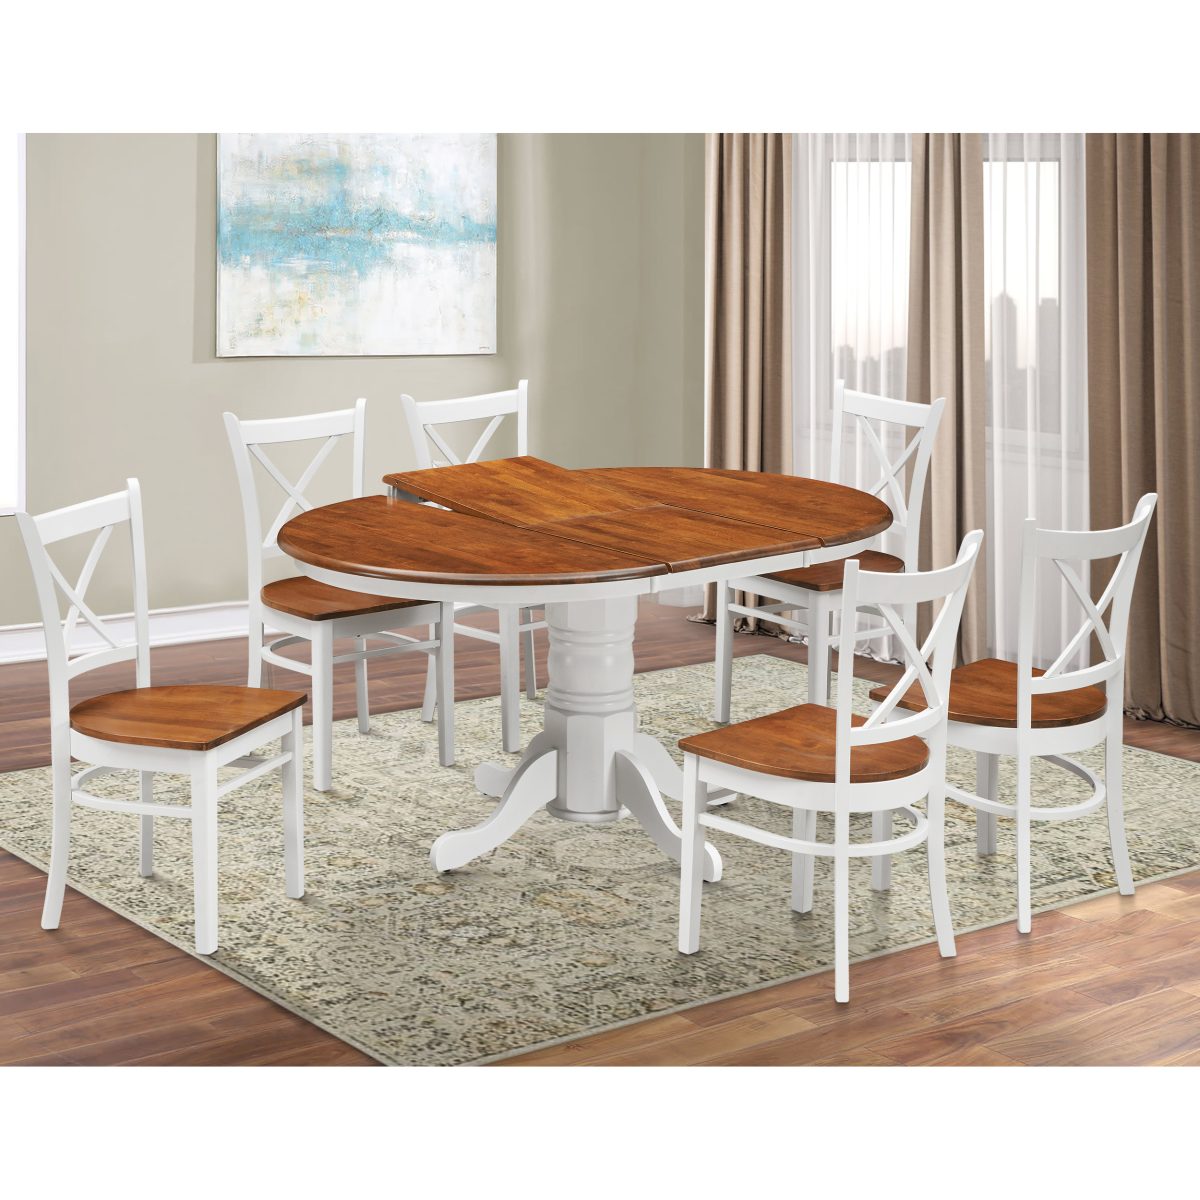 Lupin 7pc Dining Set 150cm Extendable Pedestral Table 4 Timber Chair – White Oak